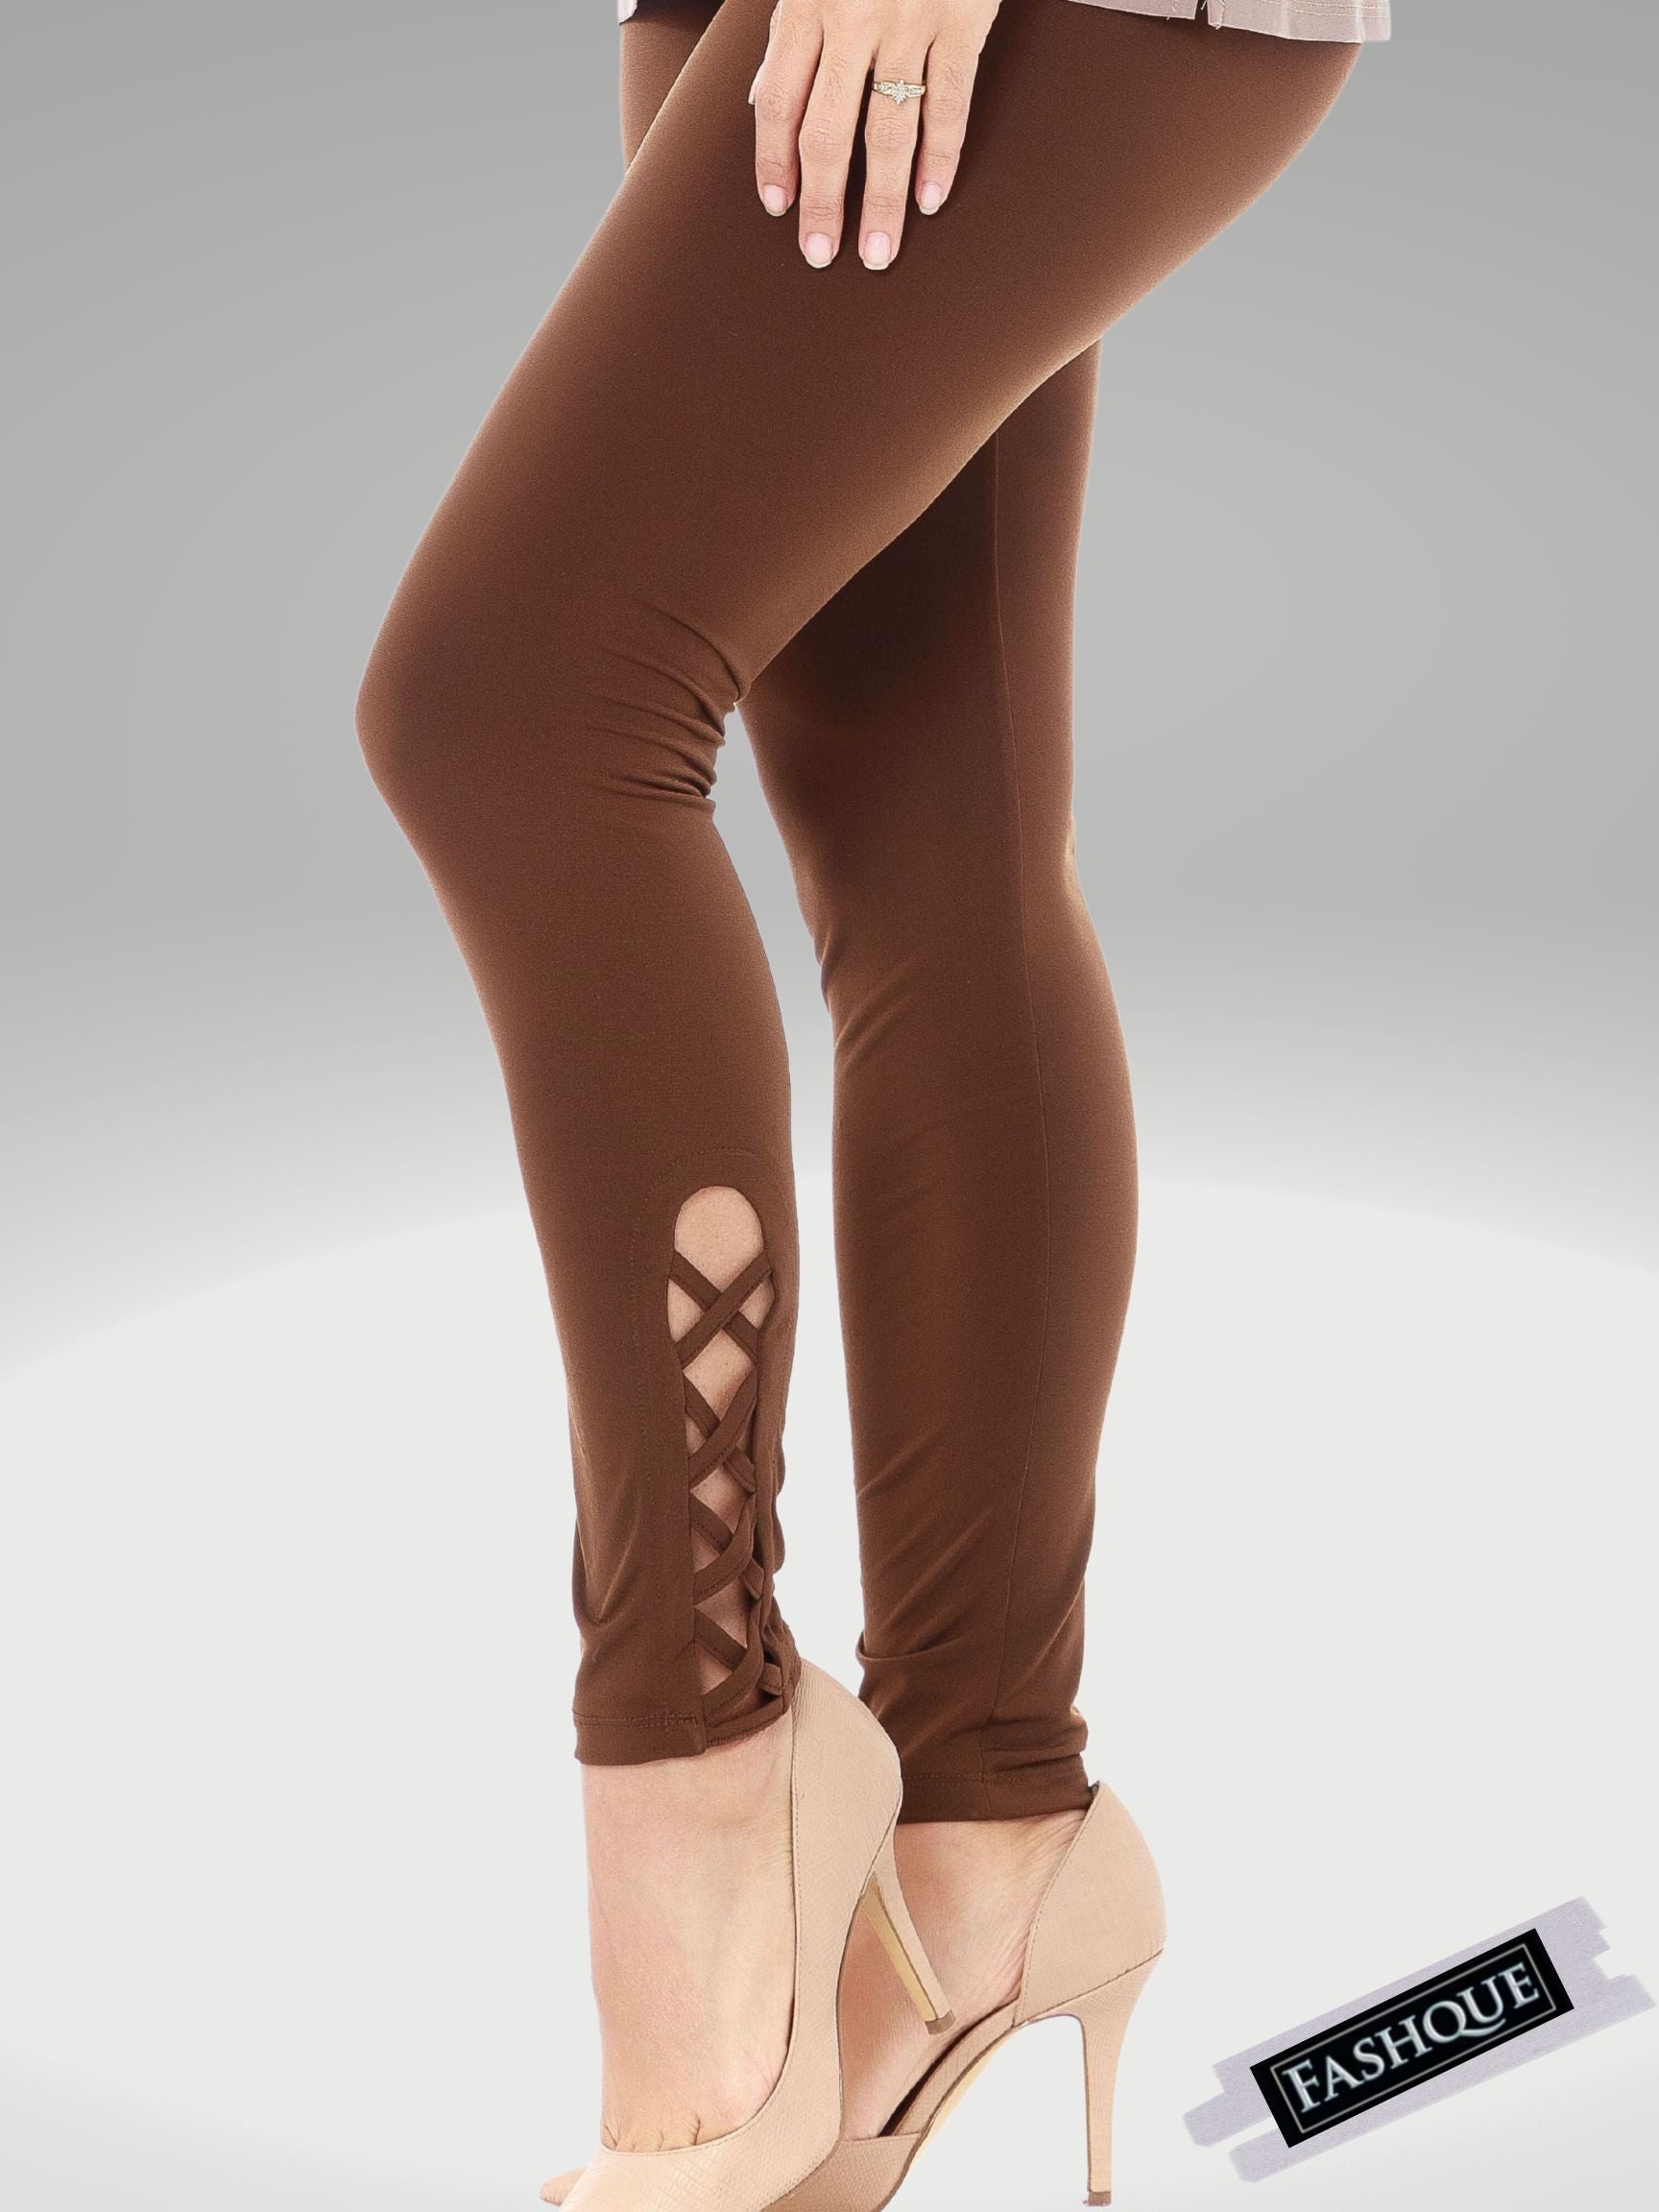 FASHQUE - Ankle length leggings with criss cross pattern at the ankle - P009 SALE